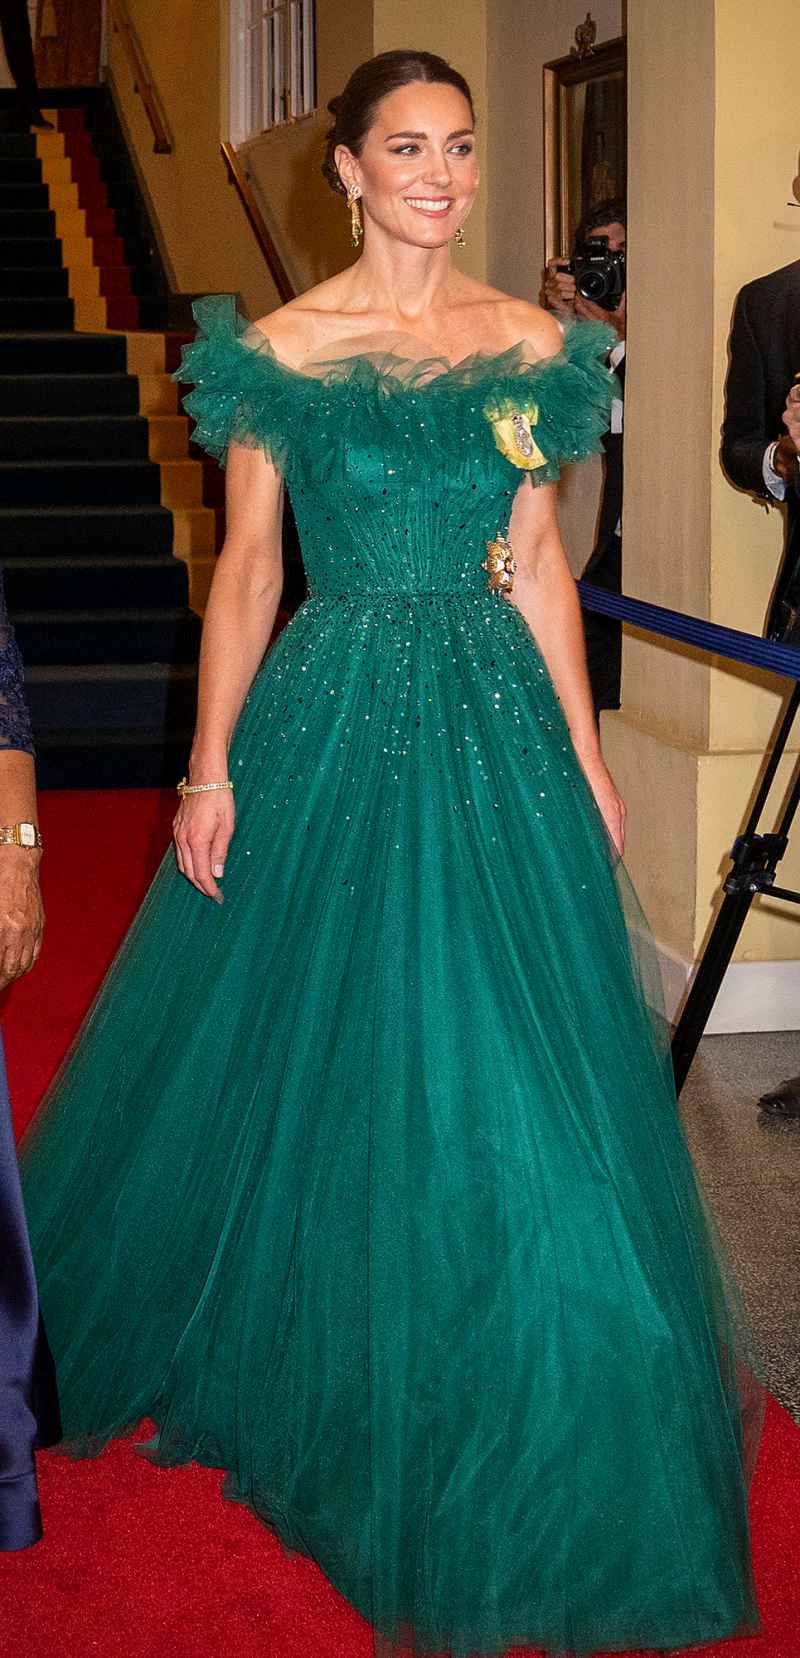 Kate Middleton Honors Princess Diana, Queen Elizabeth in Jamaica